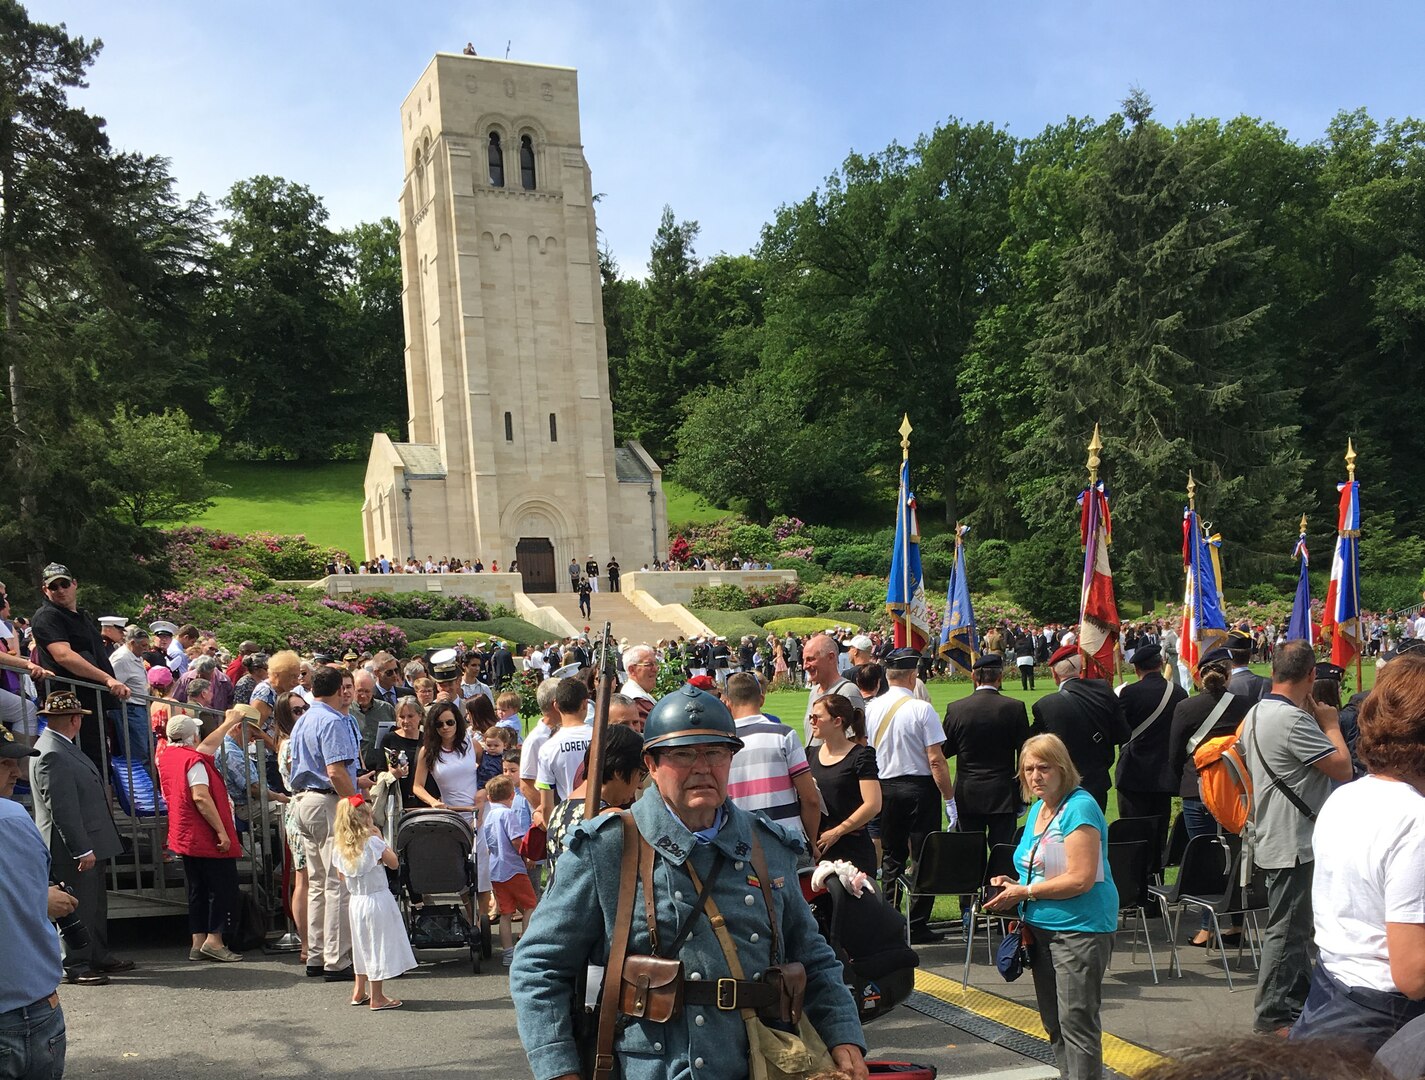 A reenactor joins attendees in honoring the sacrifices of Allied forces 100 years ago during the battles of Belleau Wood and Château-Thierry in France, near the end of World War I. In the background is the Aisne-Marne Memorial.